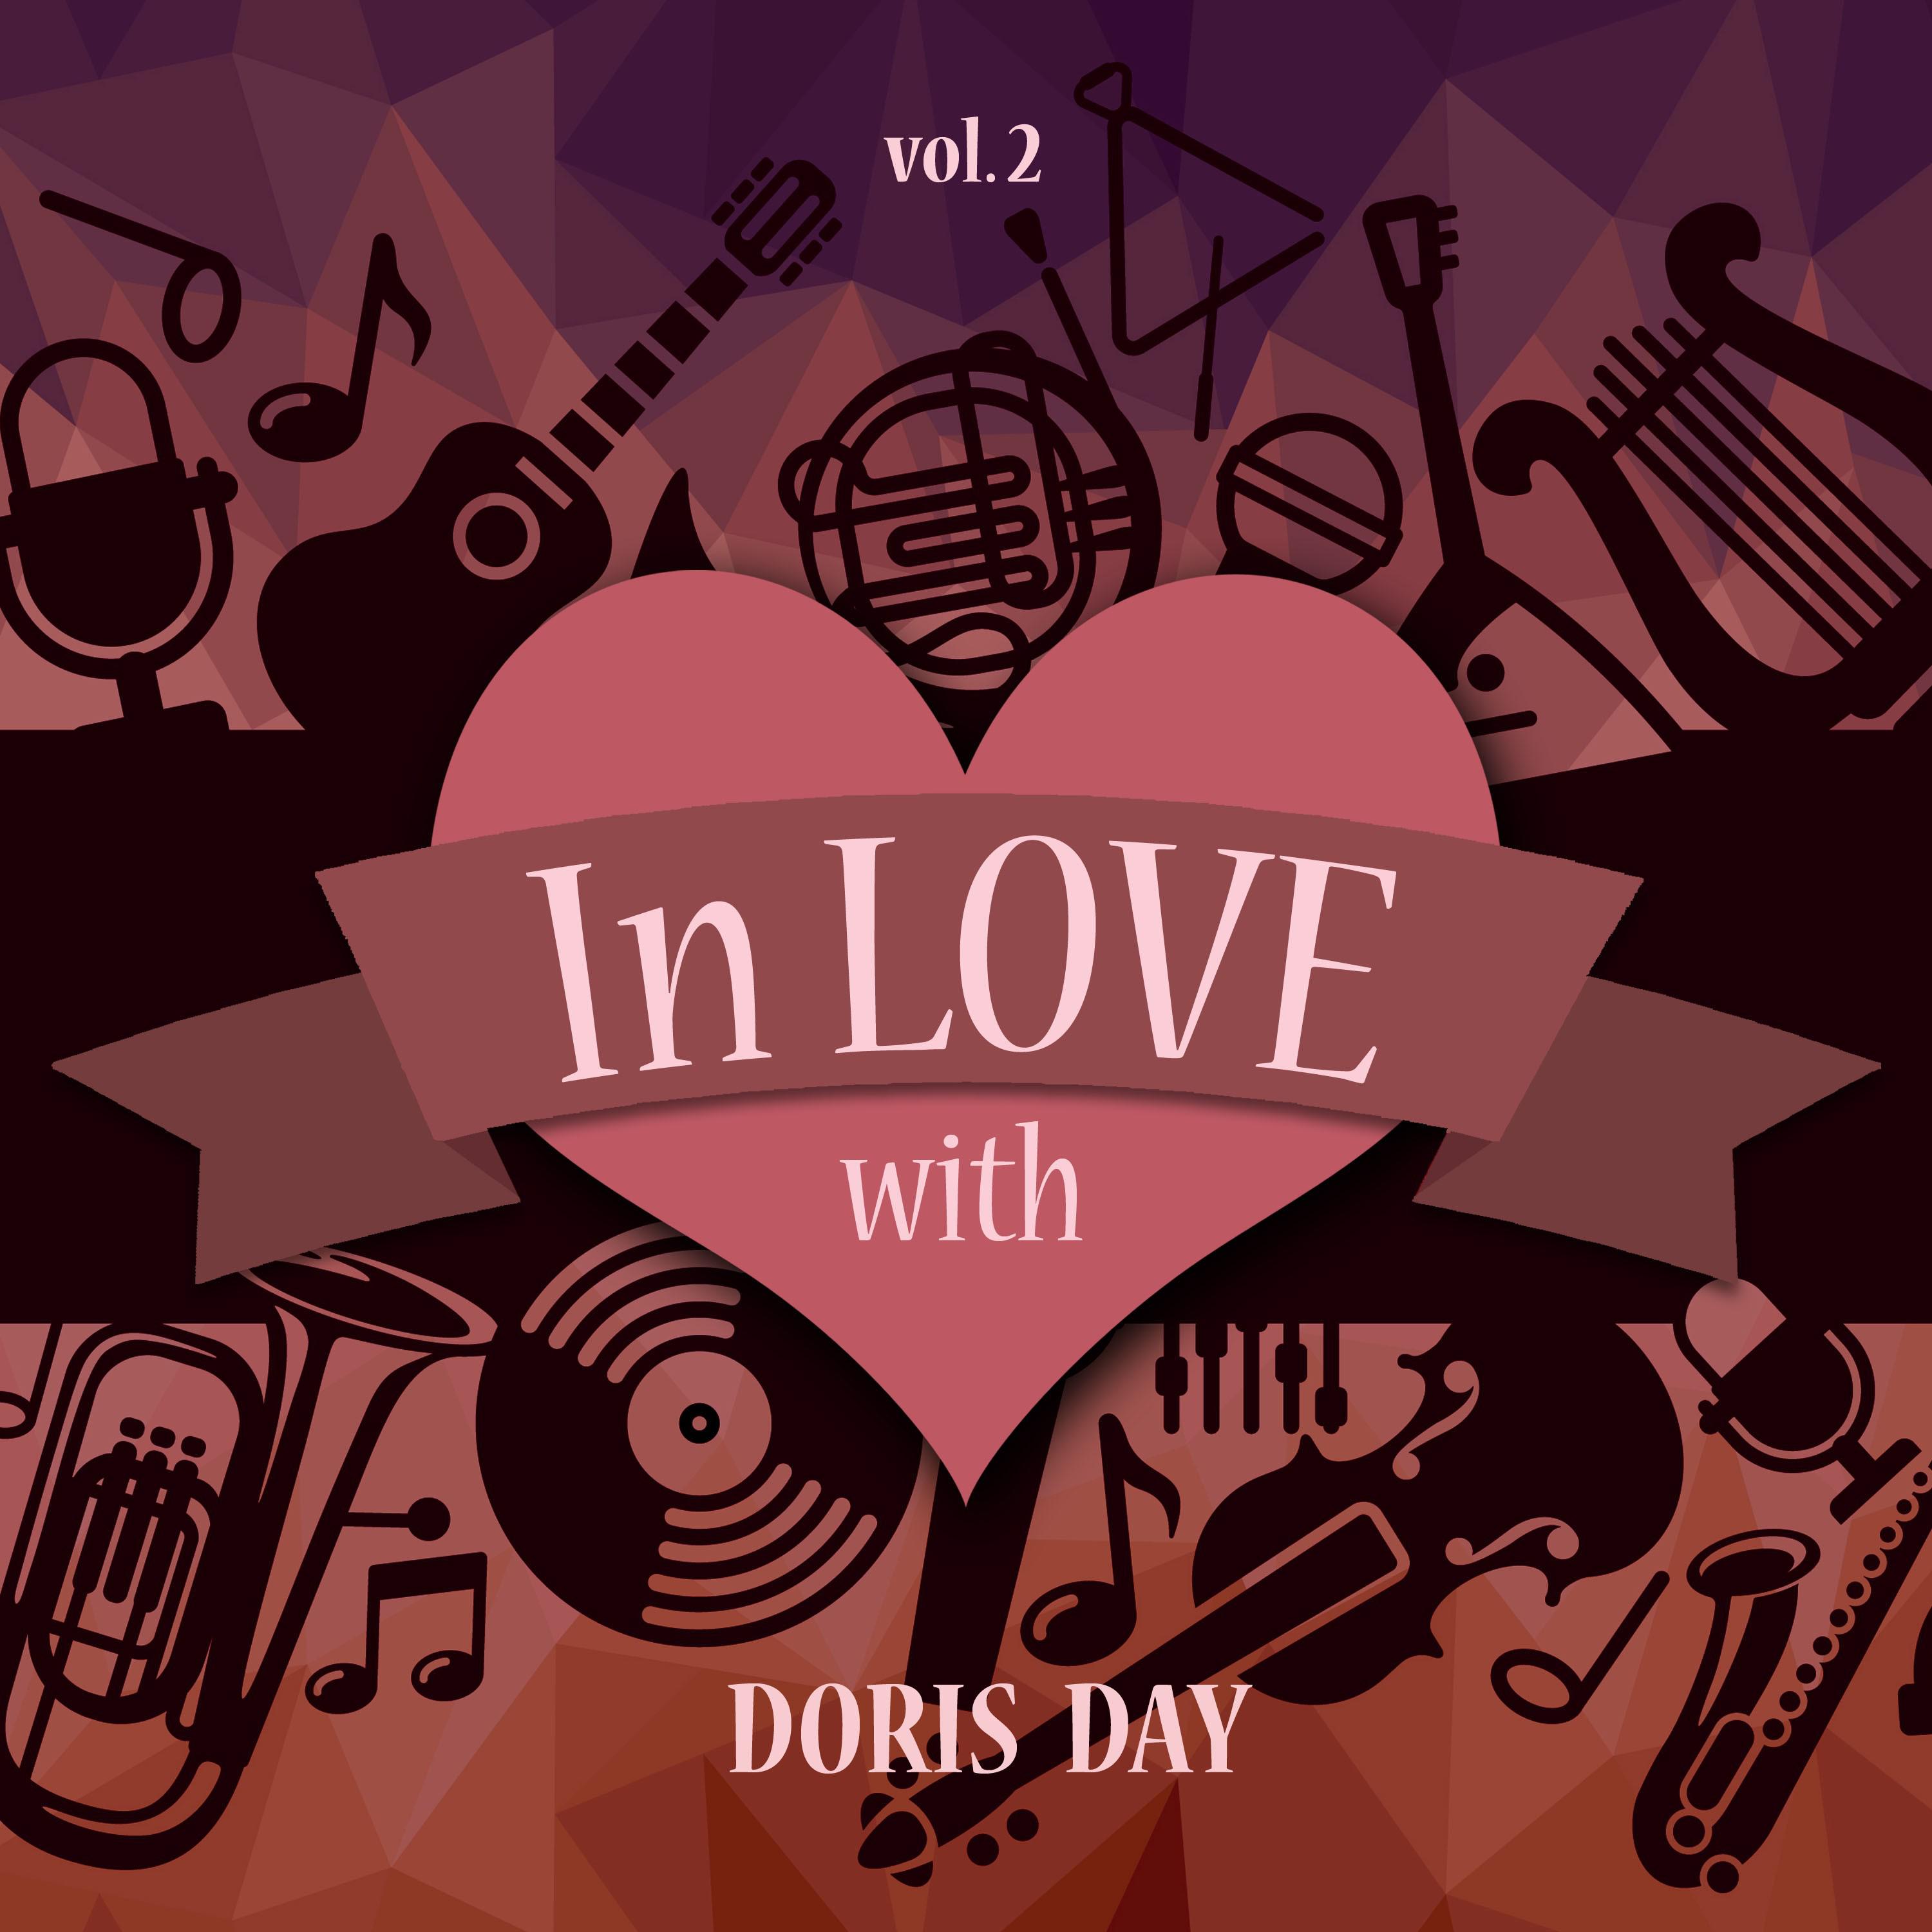 In Love with Doris Day, Vol. 2